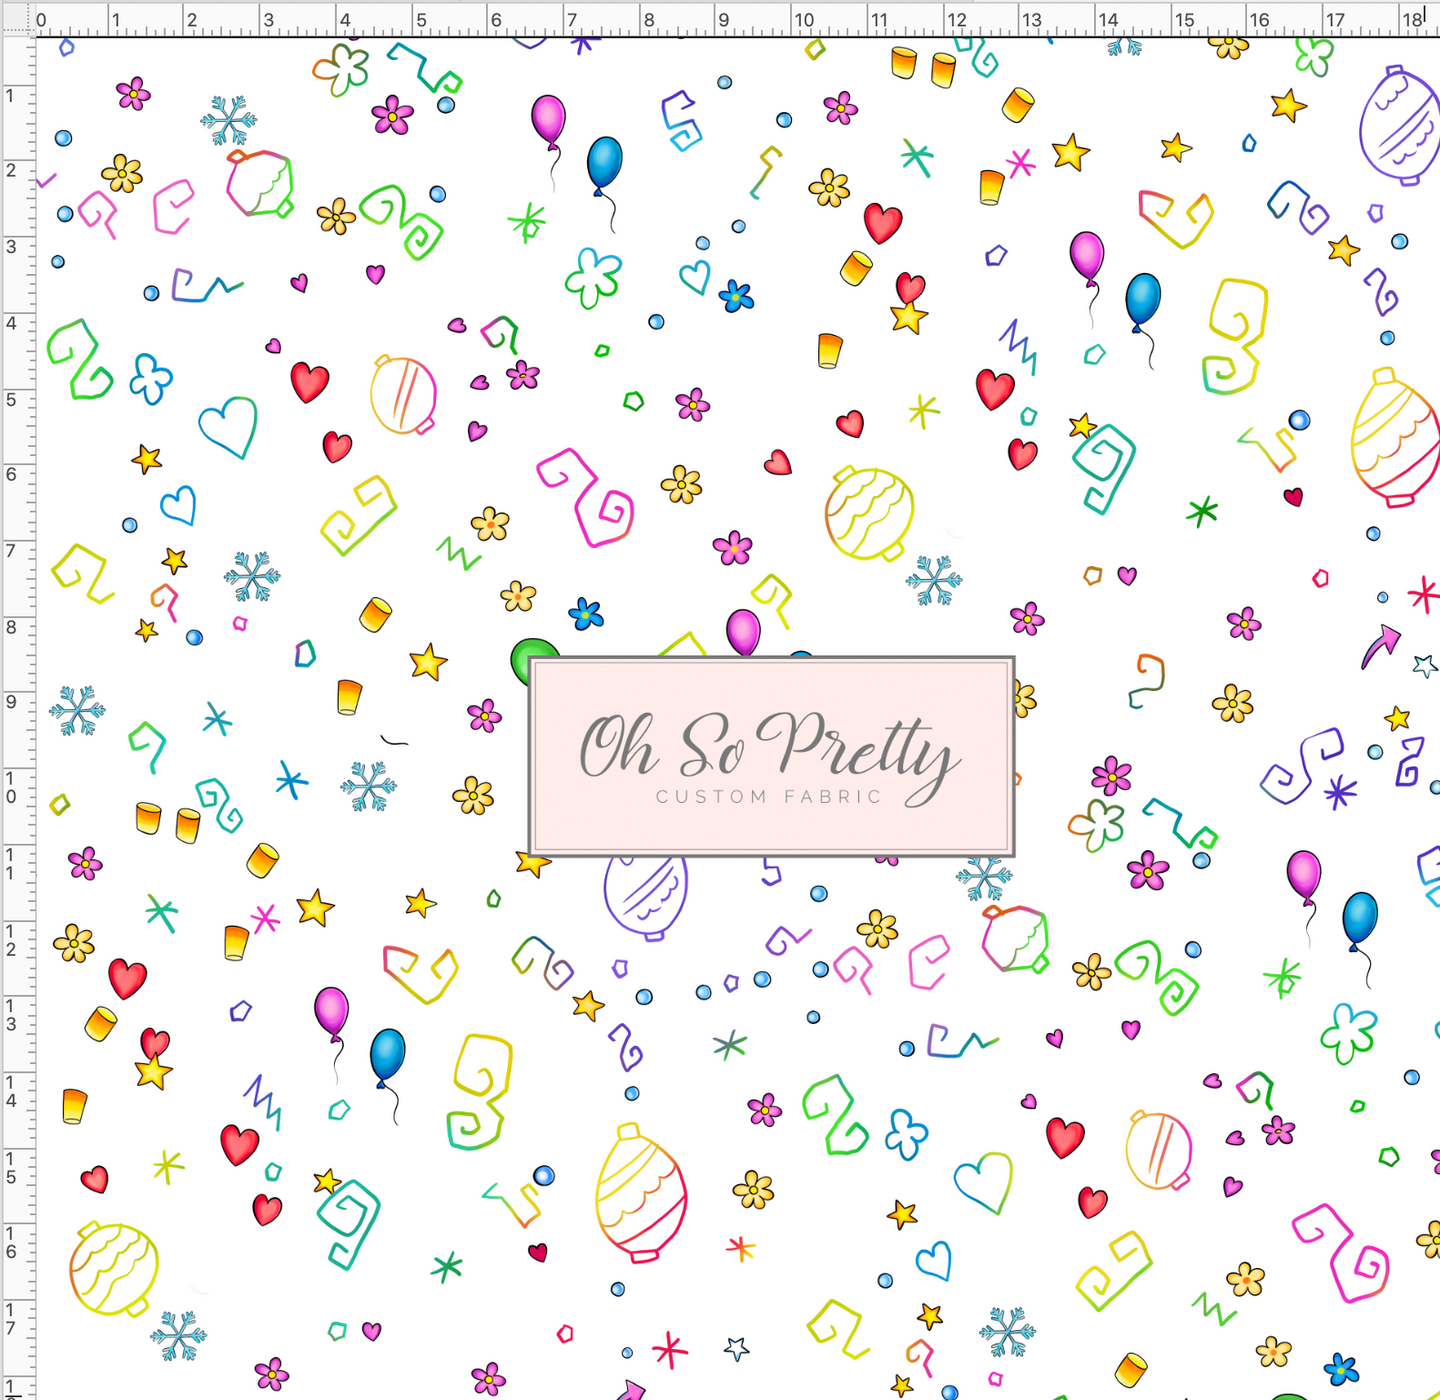 CATALOG - PREORDER R54 - Tea Cup Party - Background - White